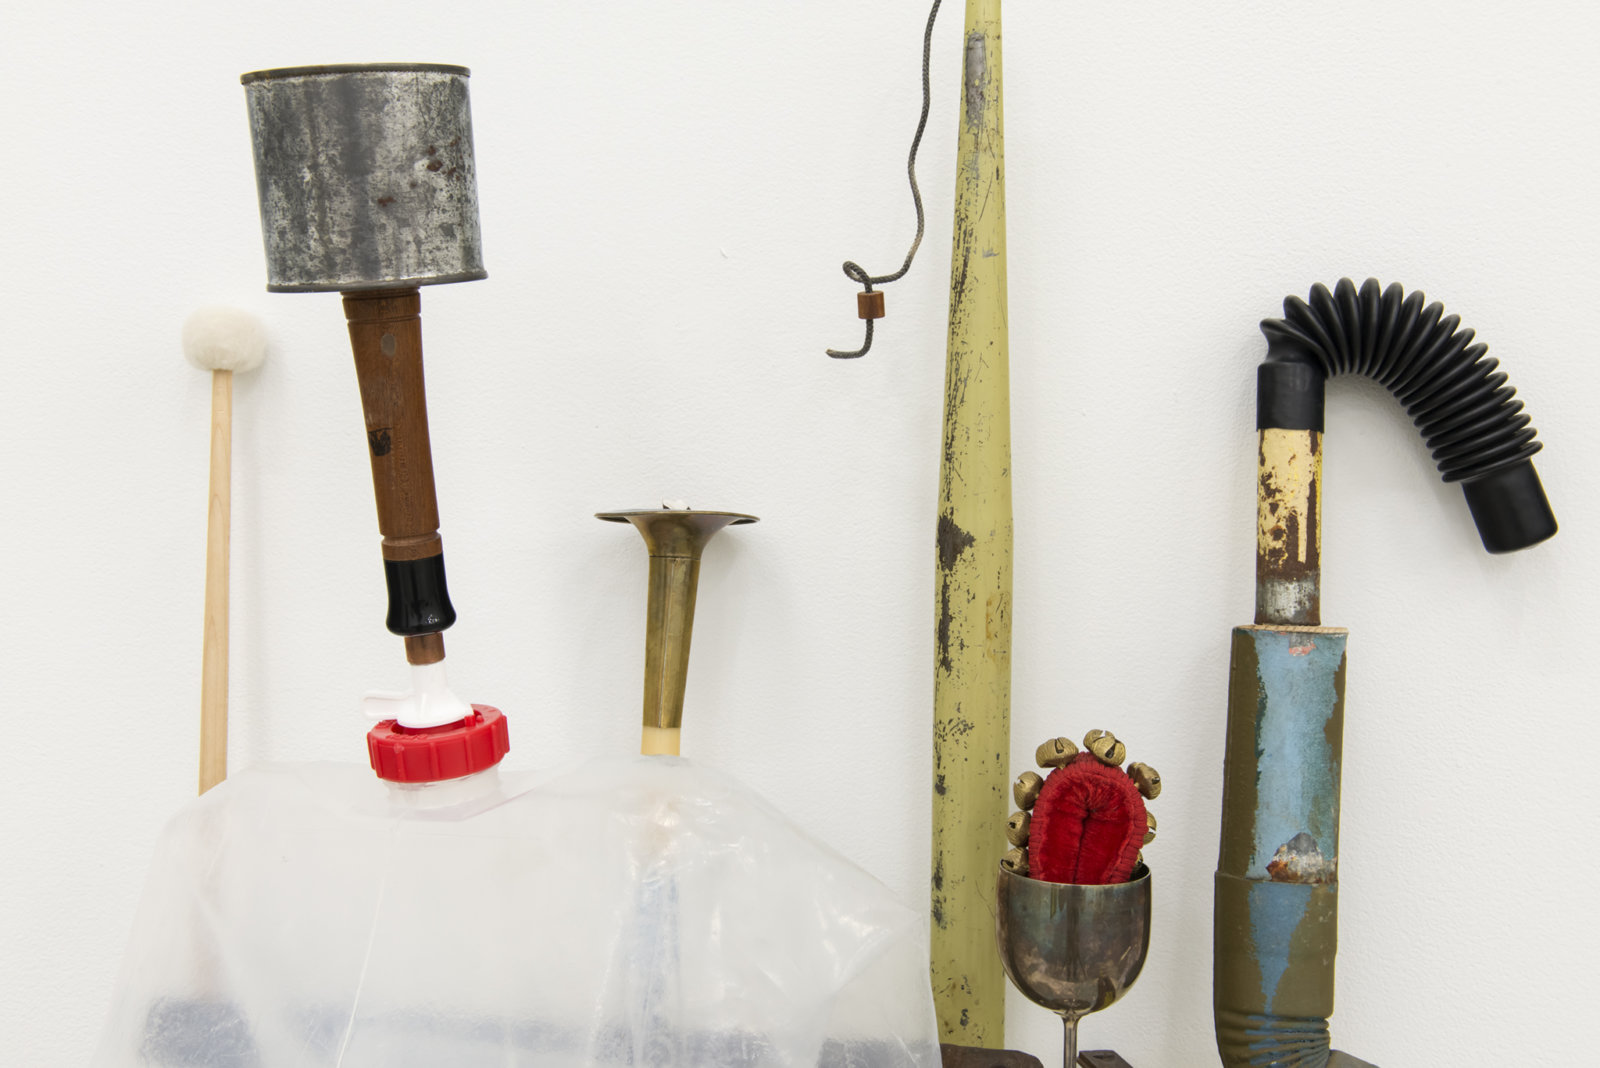 Ashes Withyman, Compass, Furnas, Altar, River, Cetus, Musca, Cup (detail), 2017–2018, water jug, sash weight, mallet, bells, brass horn, hunting call parts, drainpipe, chair leg, silver cup, marker, electrical parts, painted plywood, 29 x 25 x 12 in. (72 x 64 x 31 cm)